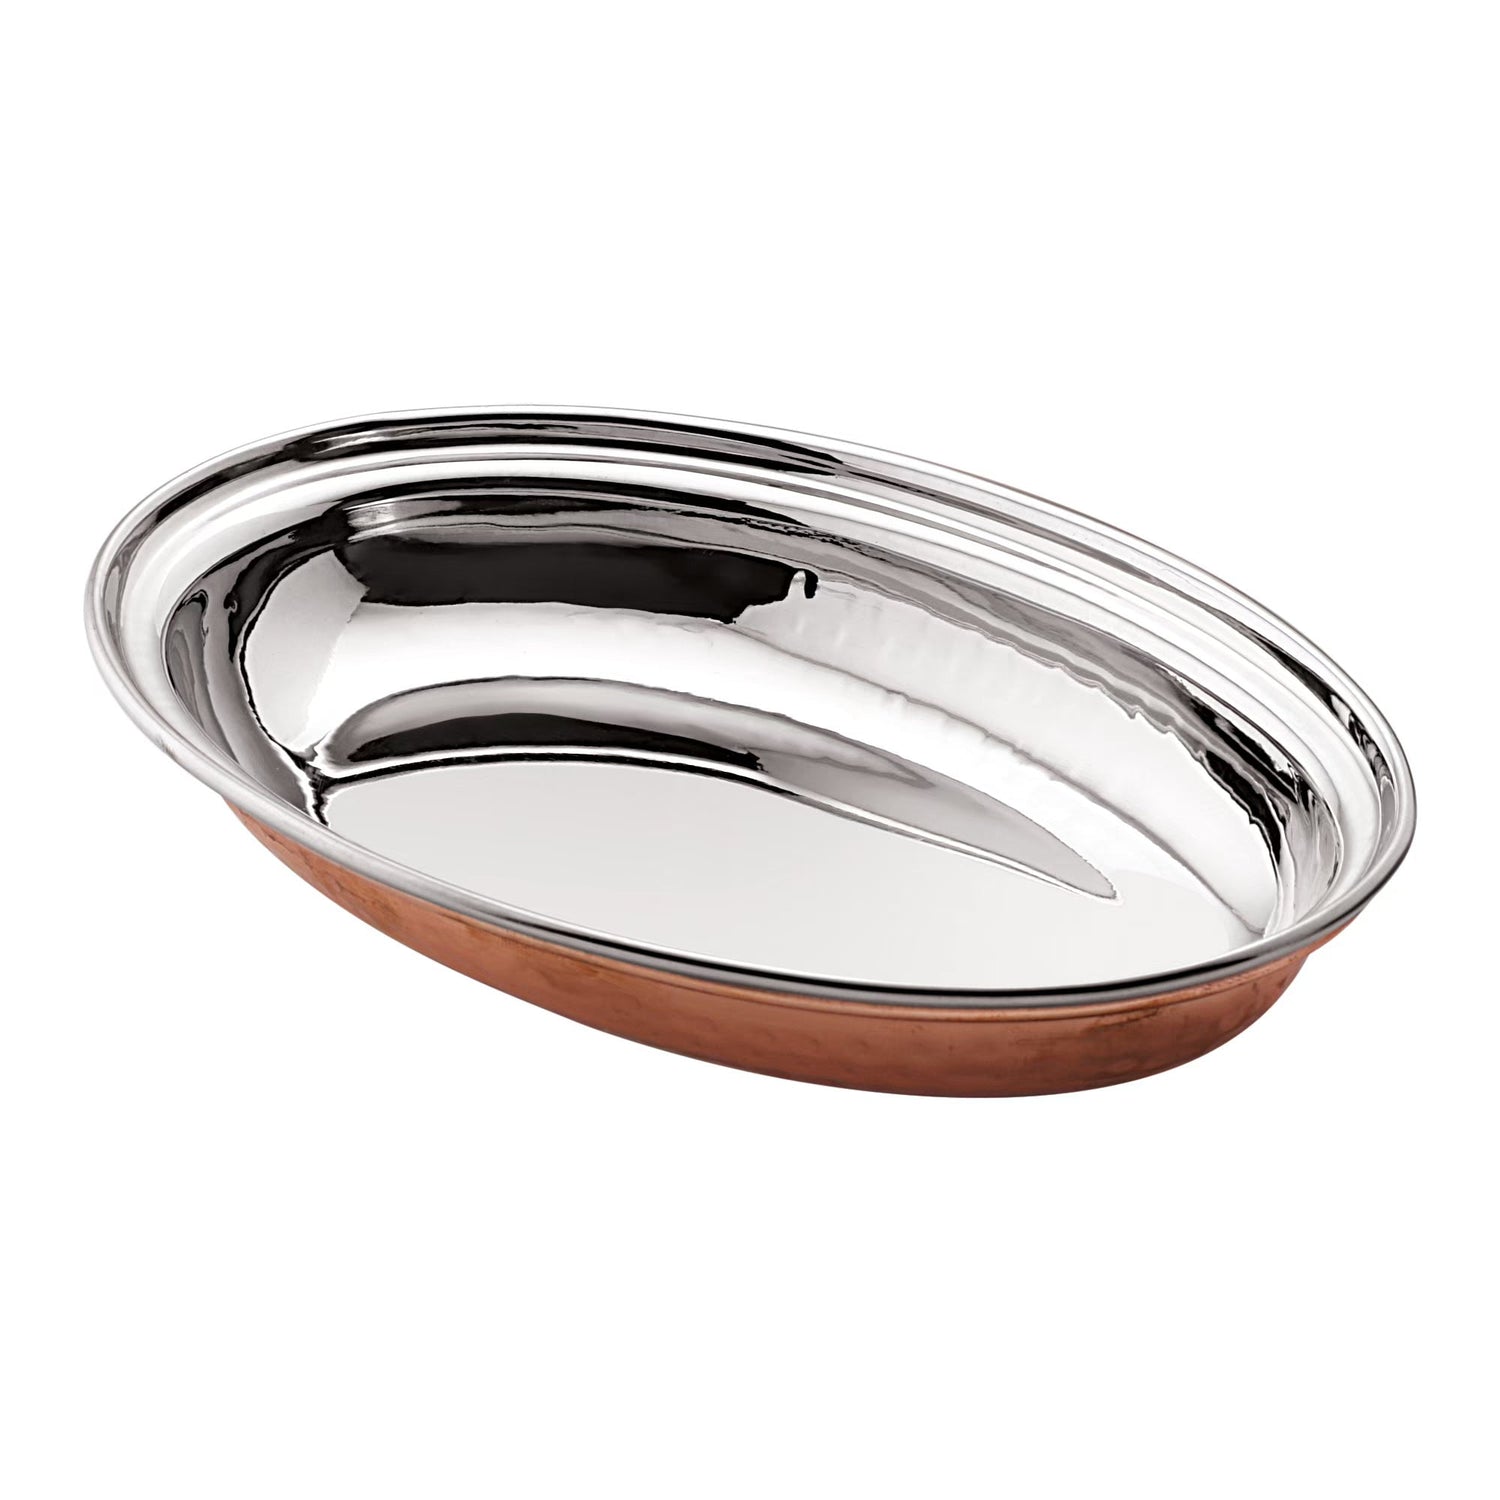 Pipal Steel Copper Oval Dish